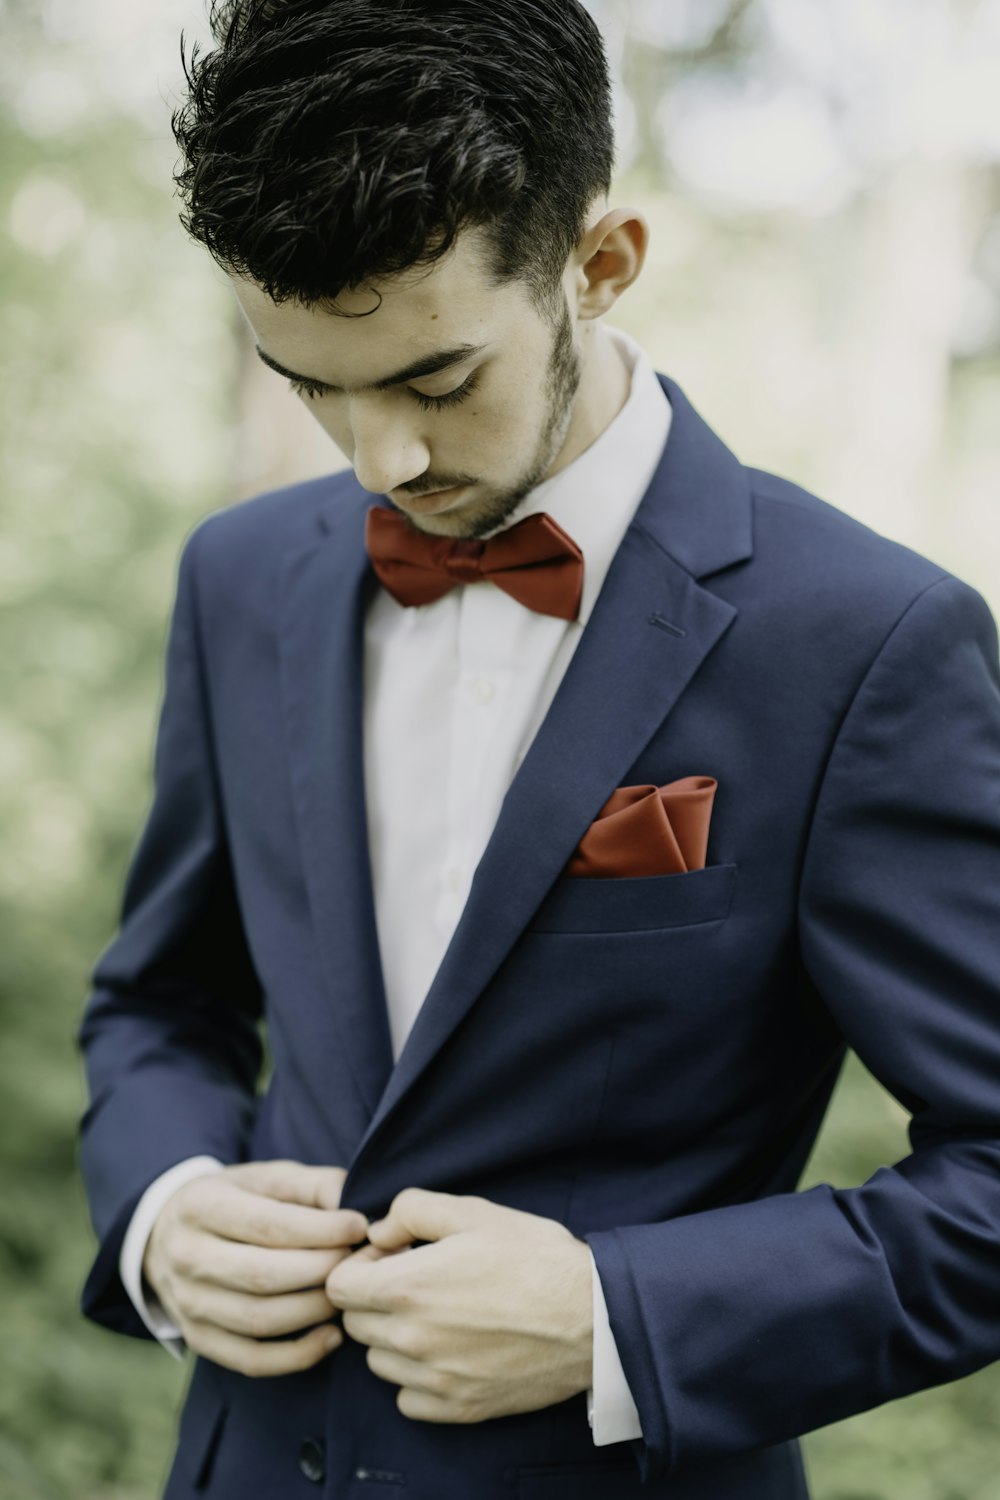 Soviético Perforar sobrino A man in a blue suit with a red bow tie photo – Free Coat Image on Unsplash